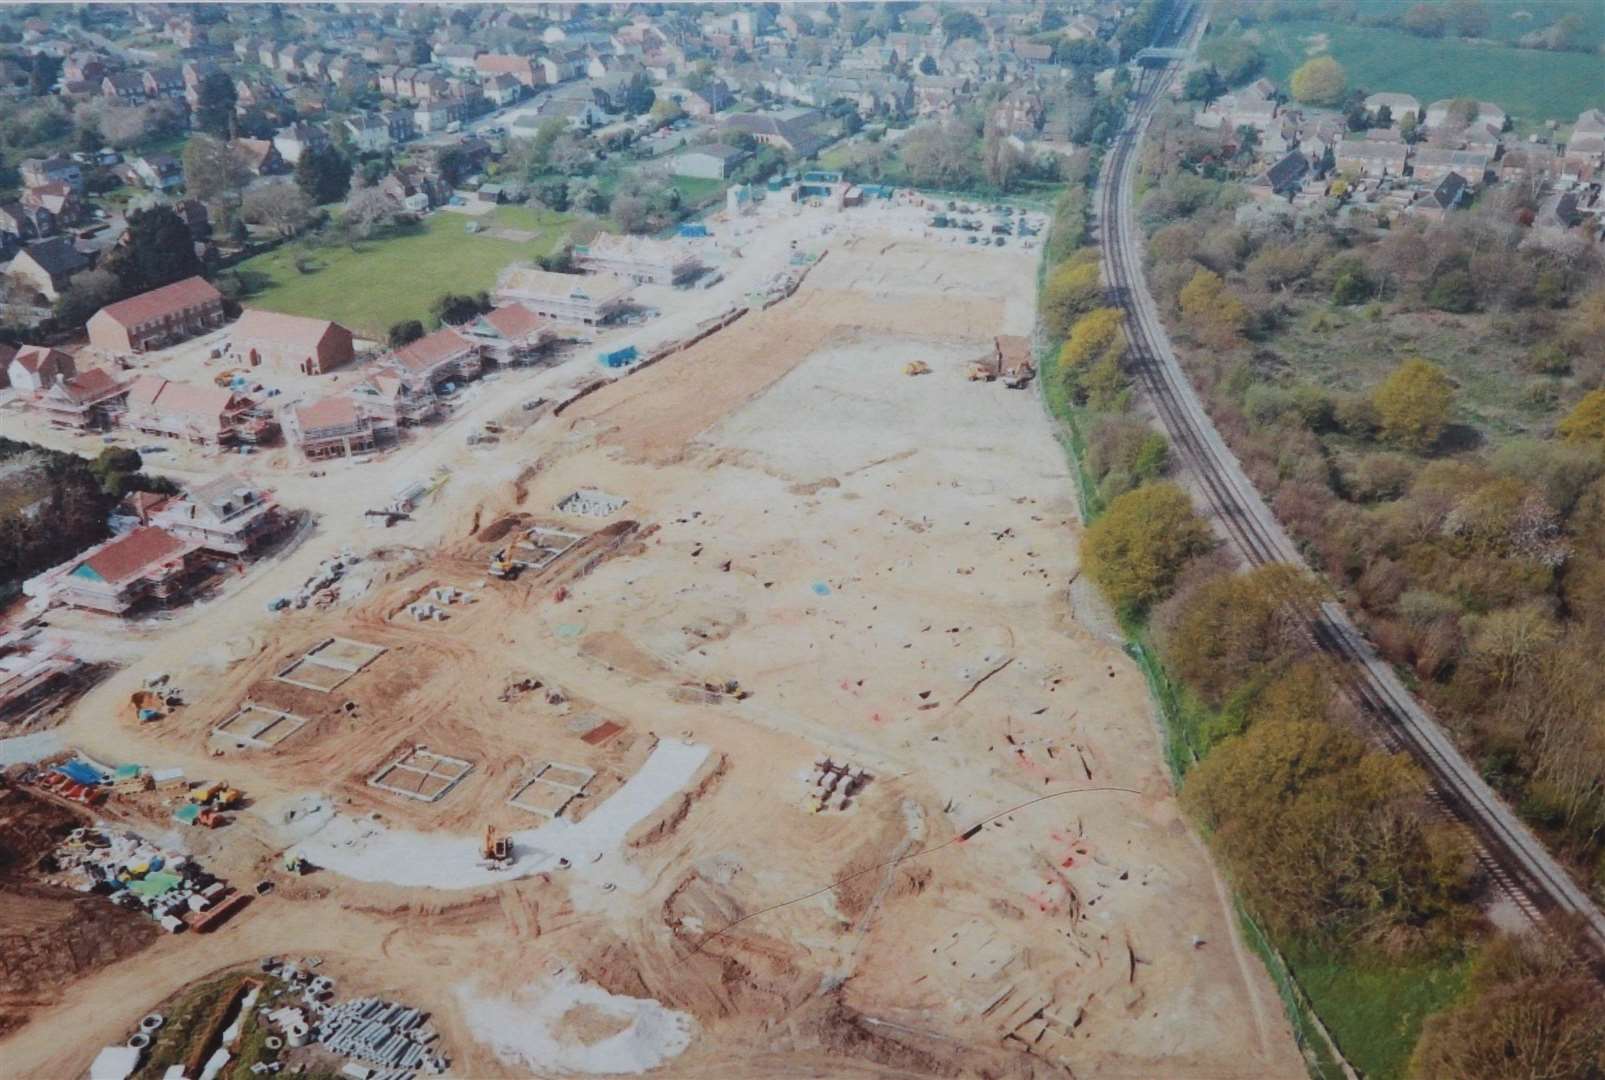 The 18-acre site off Newington High Street, pictured during the extensive archaeological excavations